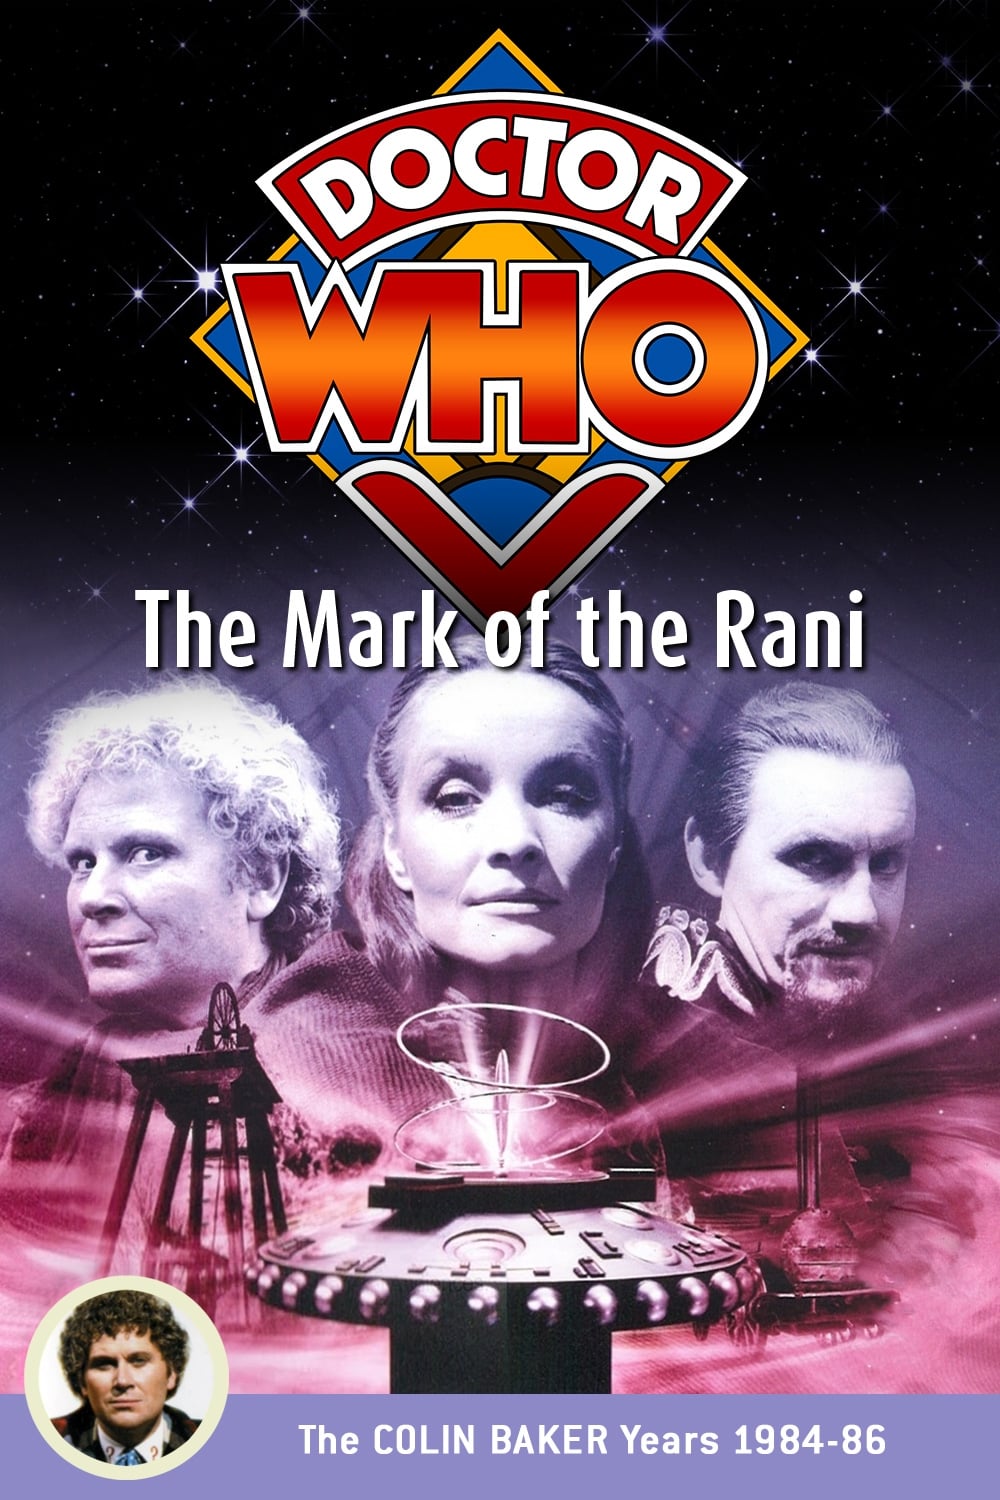 Doctor Who: The Mark of the Rani (1985)